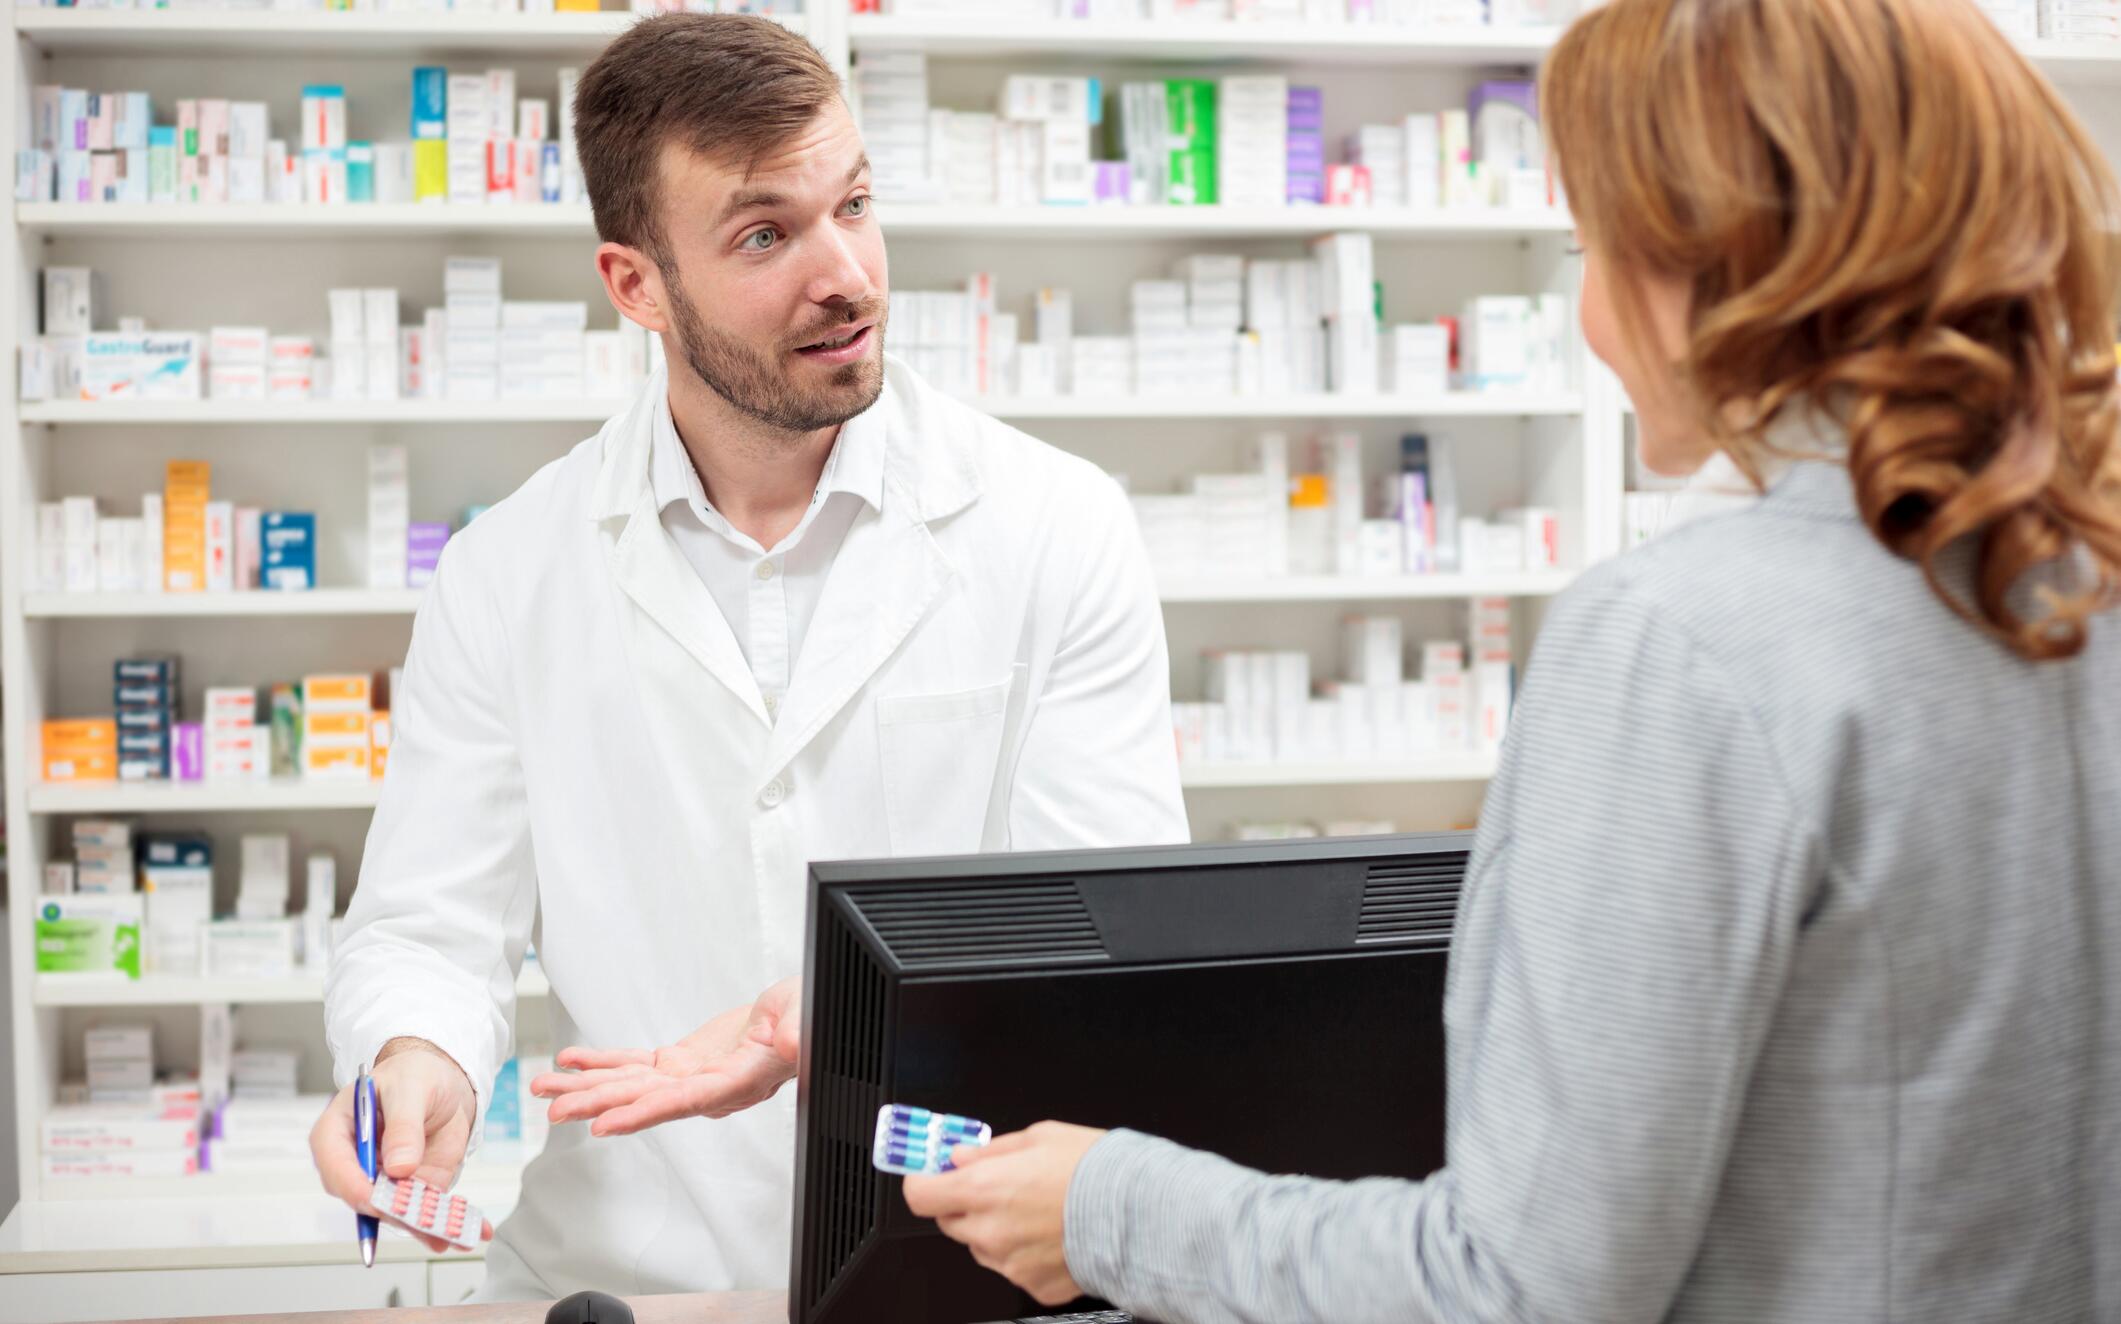 OG_YOUNG_MALE_PHARMACIST_STANDING_BEHIND_THE_COUNTER_CONSULTING_THE_FEMALE_PATIENT_ISTOCK_2023